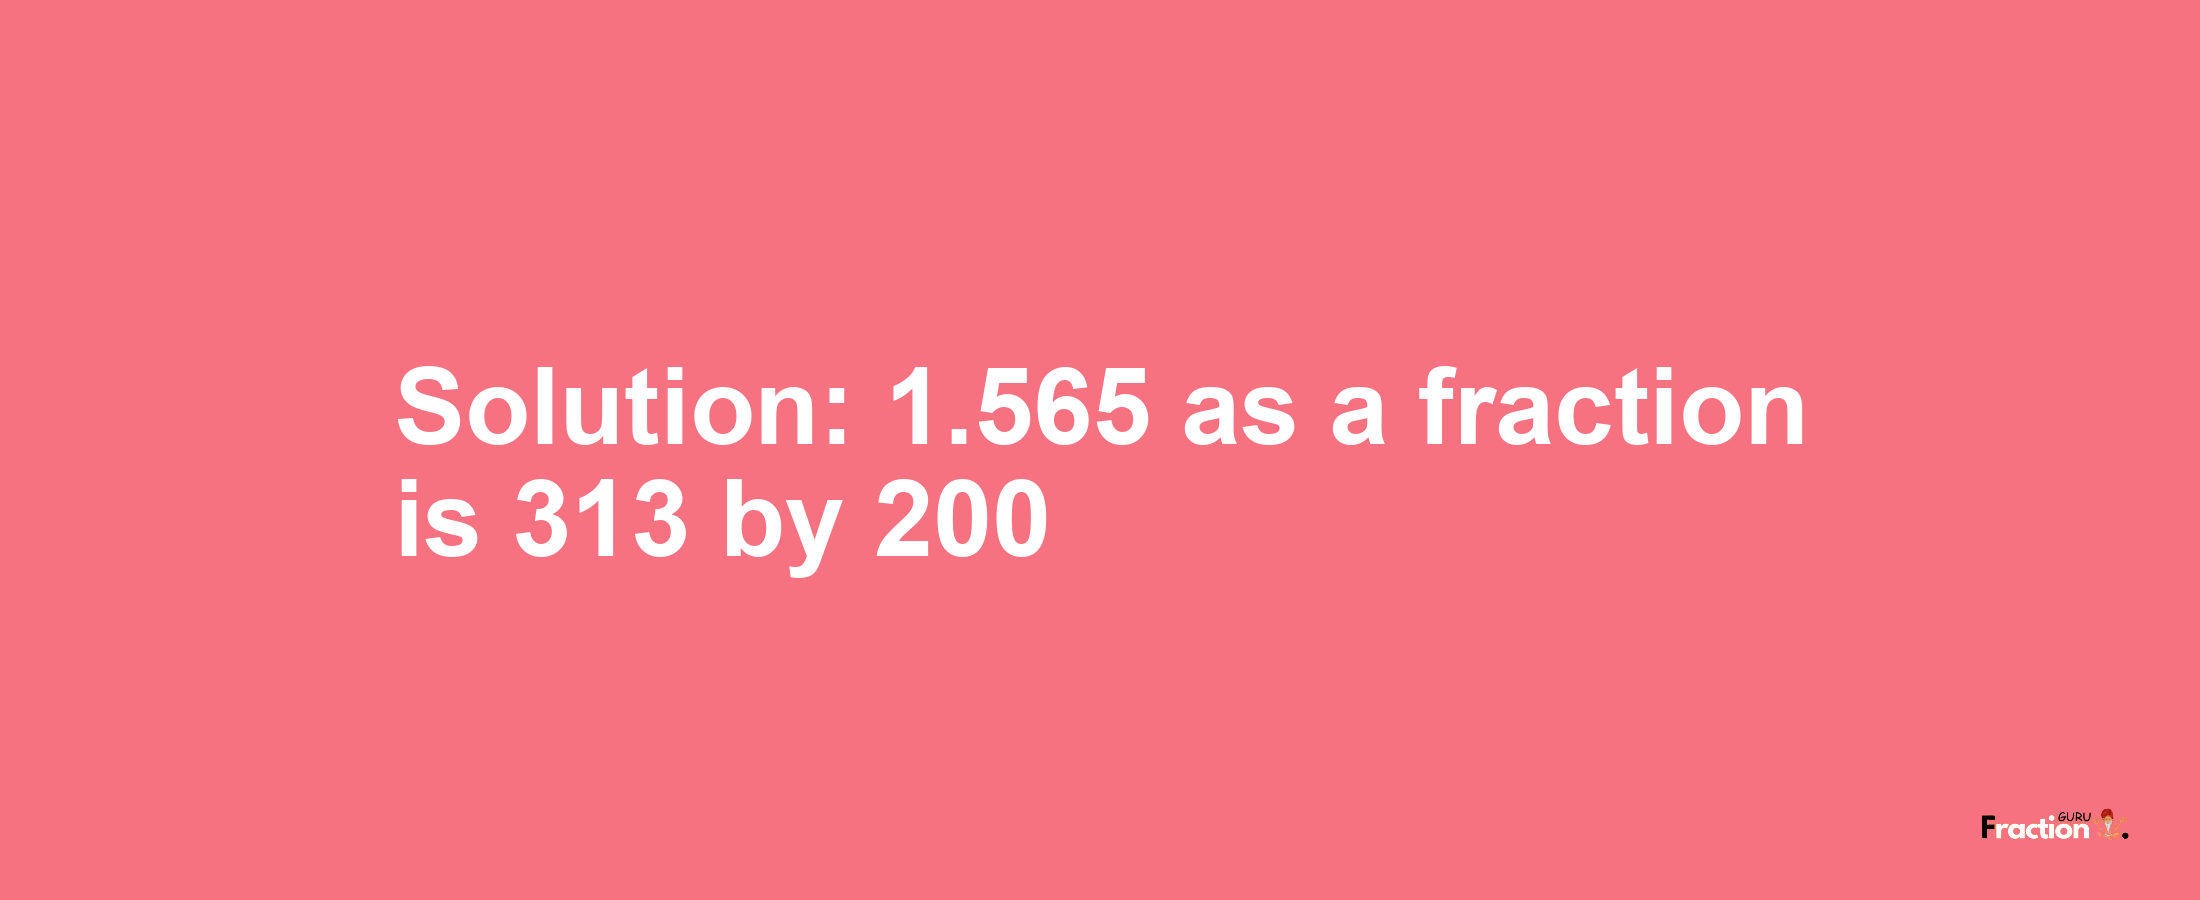 Solution:1.565 as a fraction is 313/200